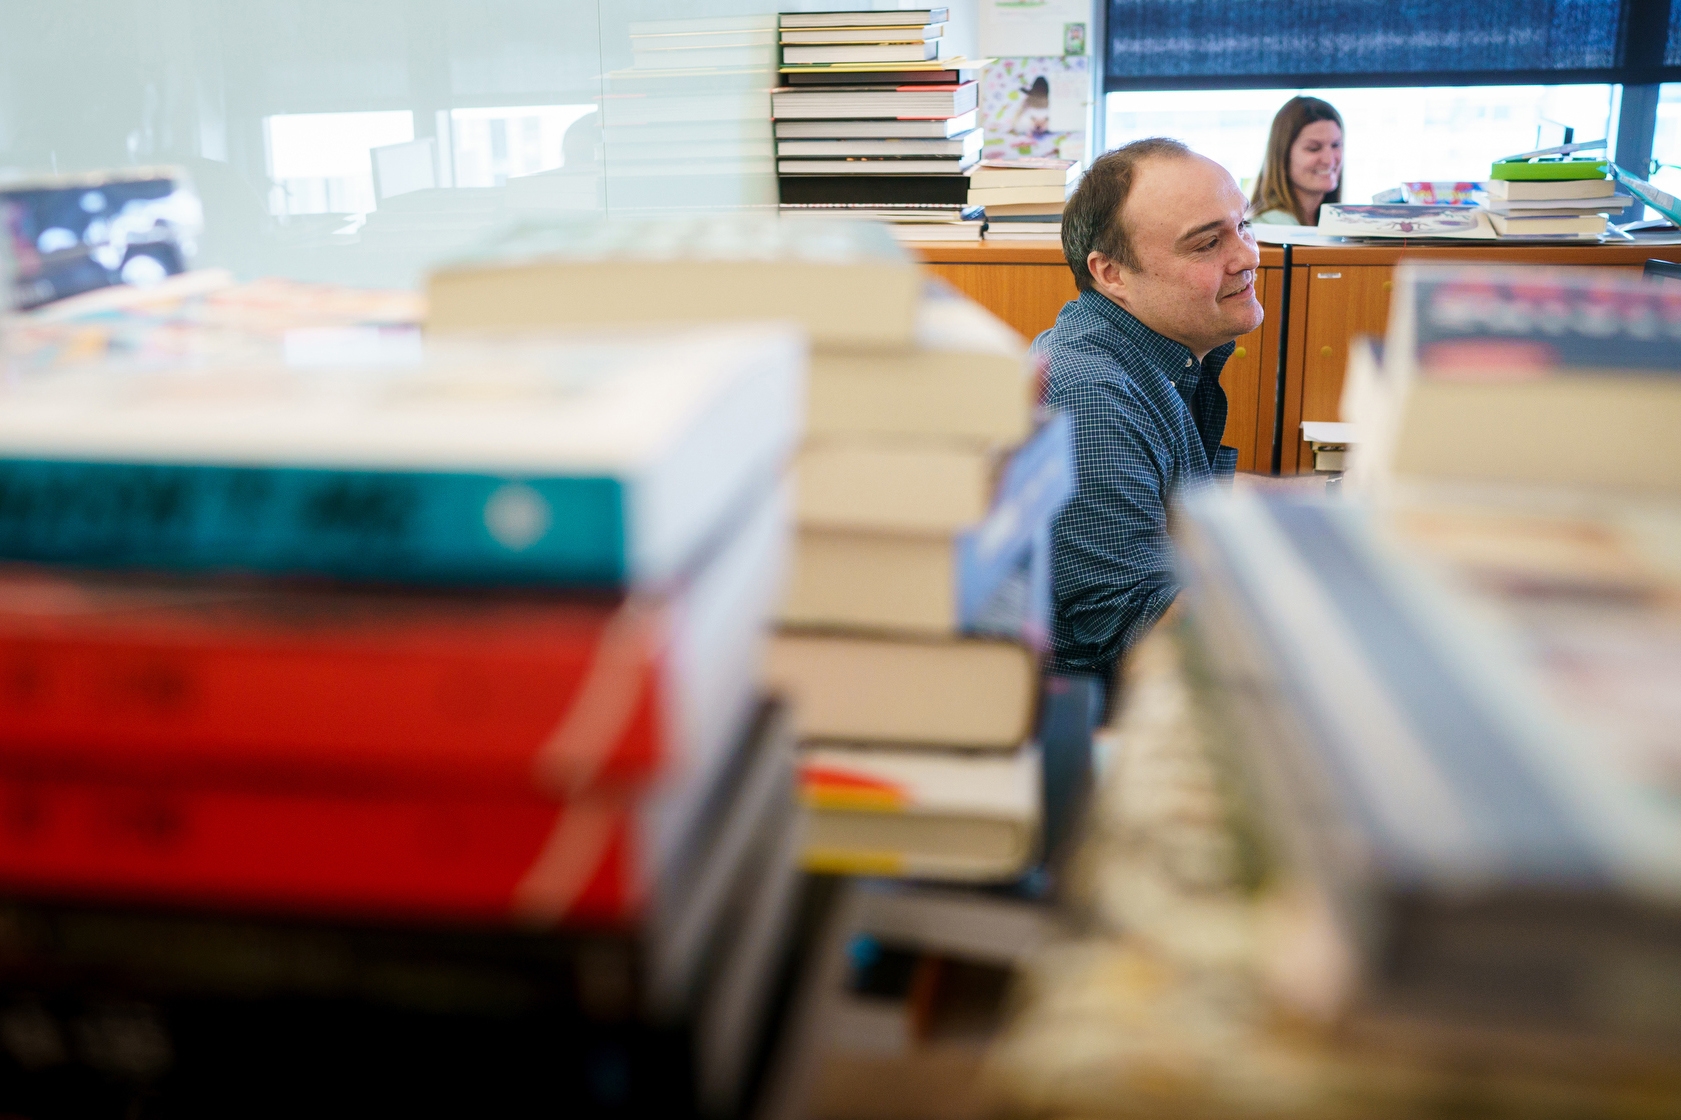 A seated man is mostly obstructed by stacks of books in the foreground of this image. He wears a dark button-down shirt and has brown hair. In the background is a woman with long brown hair as well as more stacked books on top of book shelves.